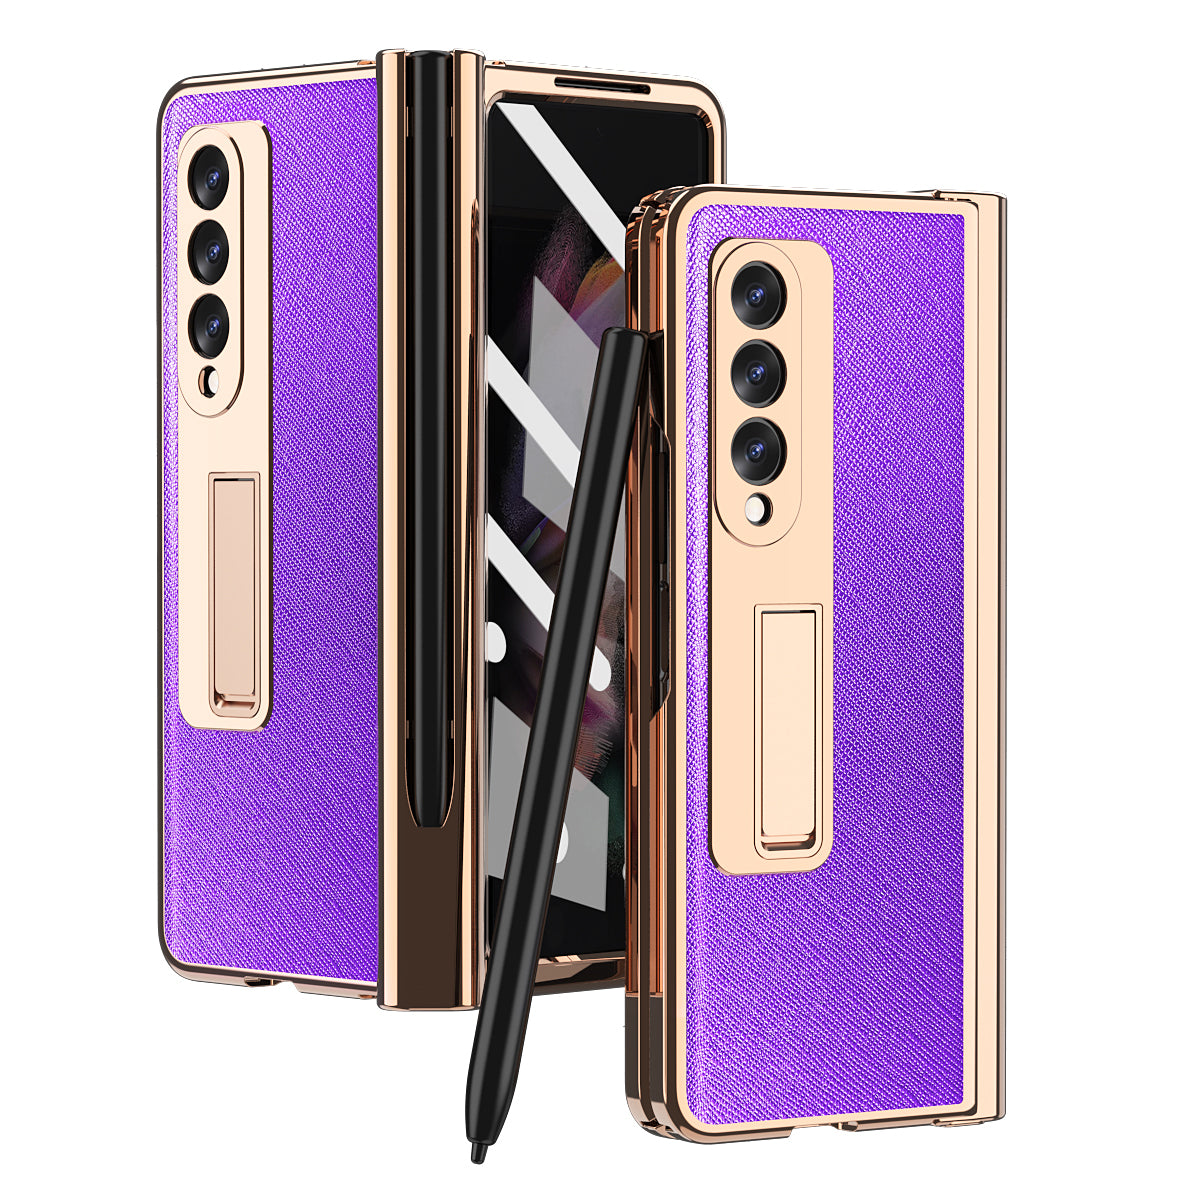 2pc Pencil Slot Hinge Full Protect For Samsung Z Fold 3 5G W22 With Front Screen Glass Z Fold3 Cover For Galaxy Z Fold 3 Case